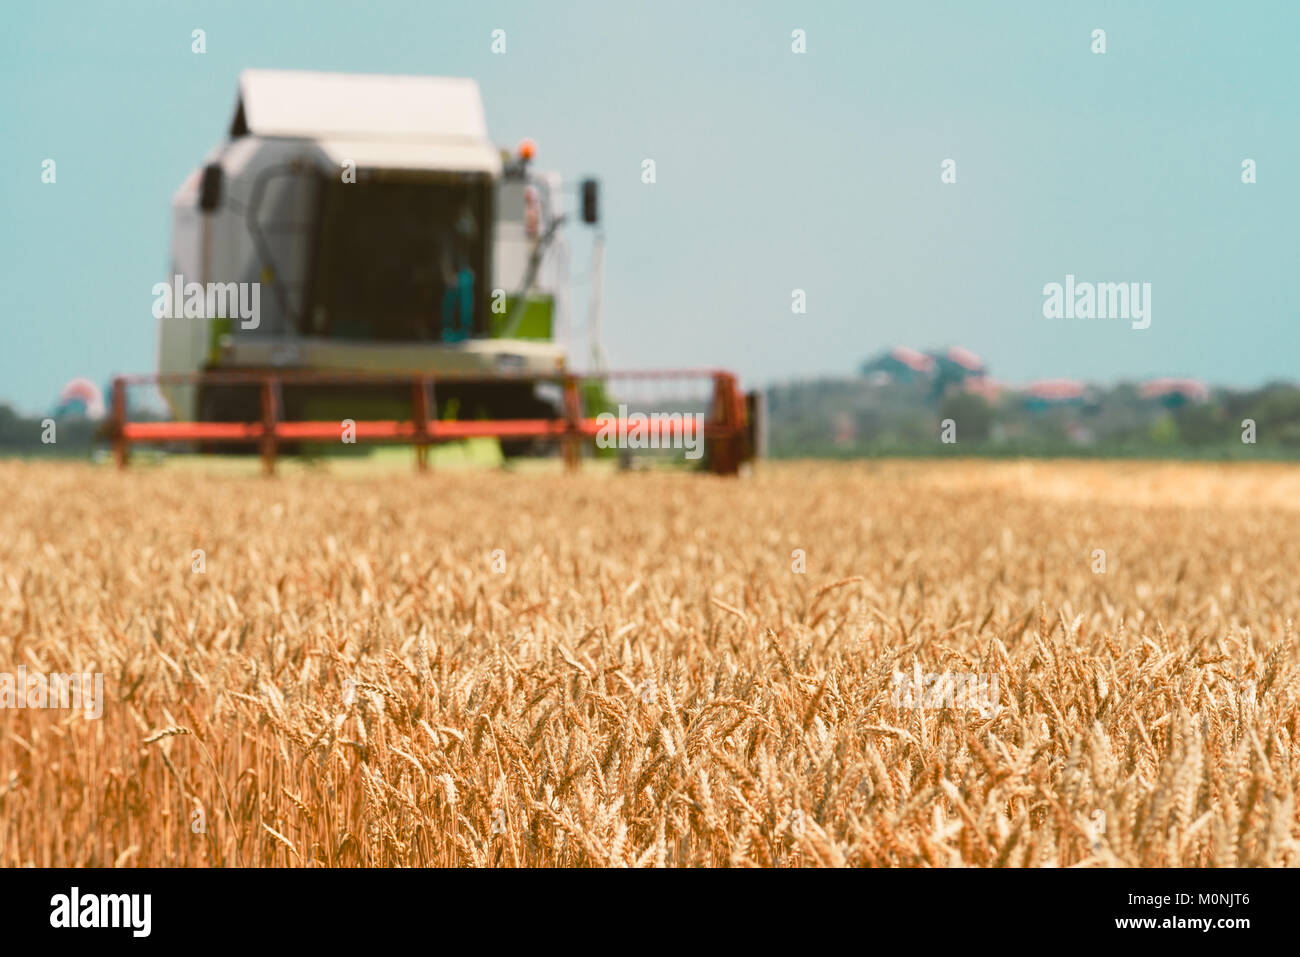 Combine harvester machine harvesting ripe wheat crops in cultivated agricultural field, selective focus Stock Photo